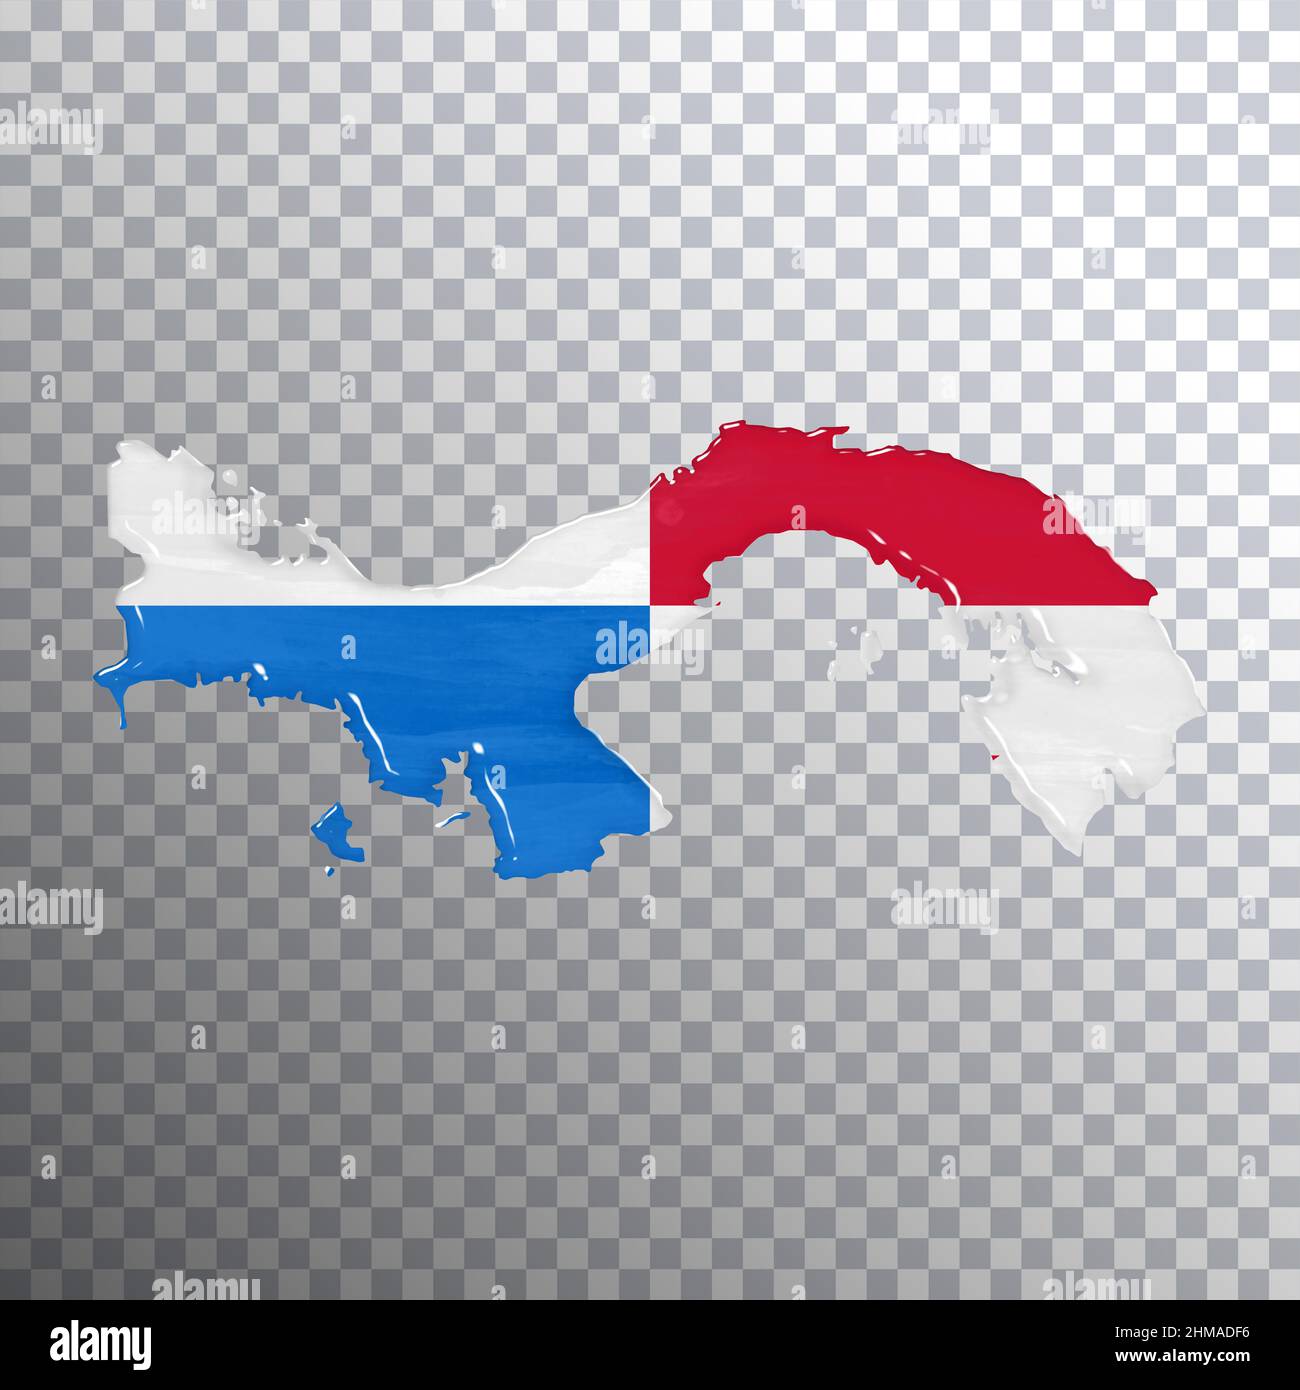 Panama flag and map, transparent background, Clipping path Stock Photo